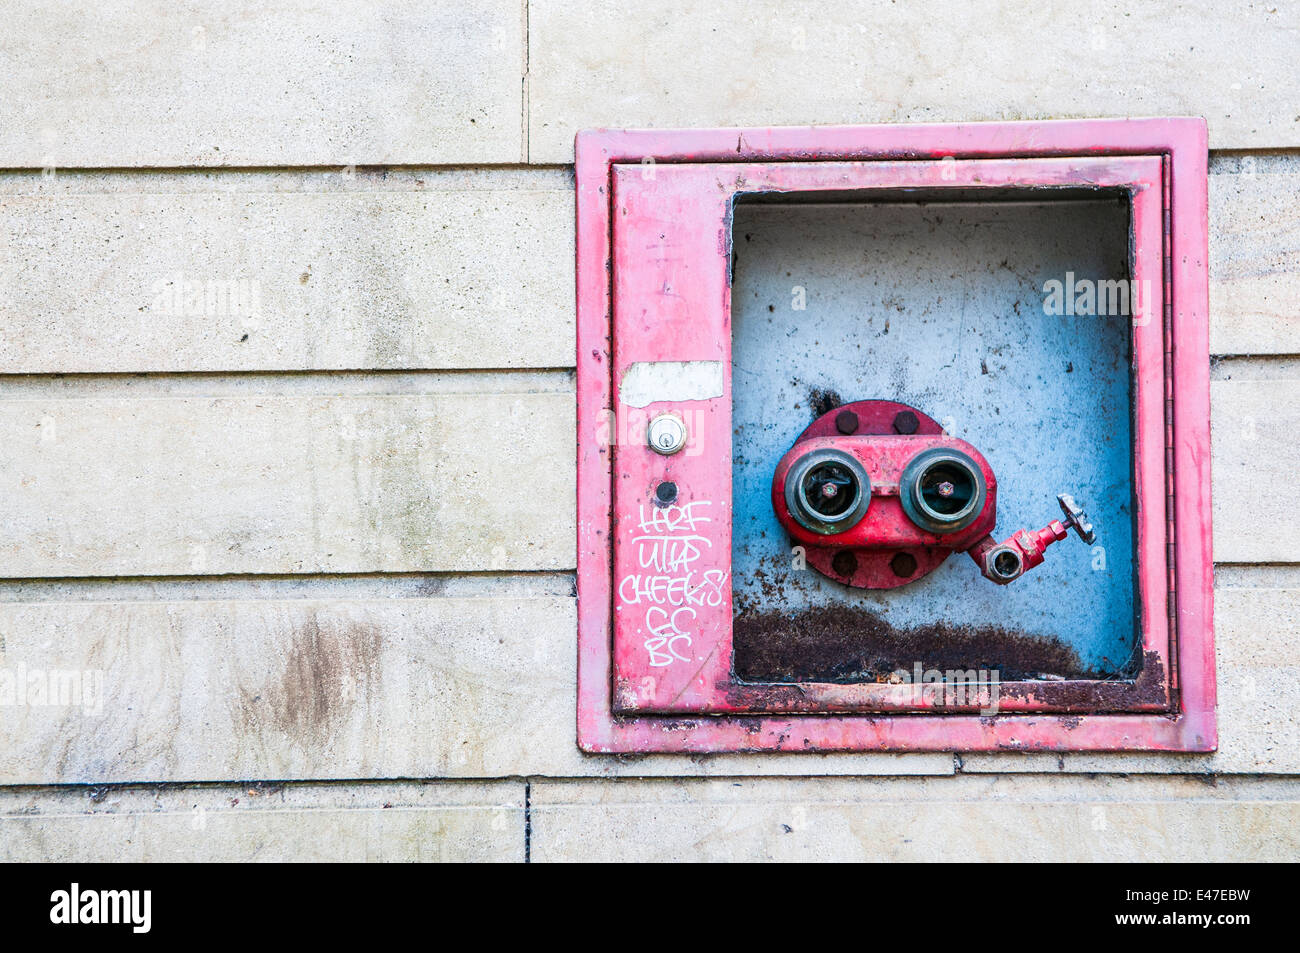 Fire hydrant on the side of a building for fire brigade service to use for fire fighting Stock Photo